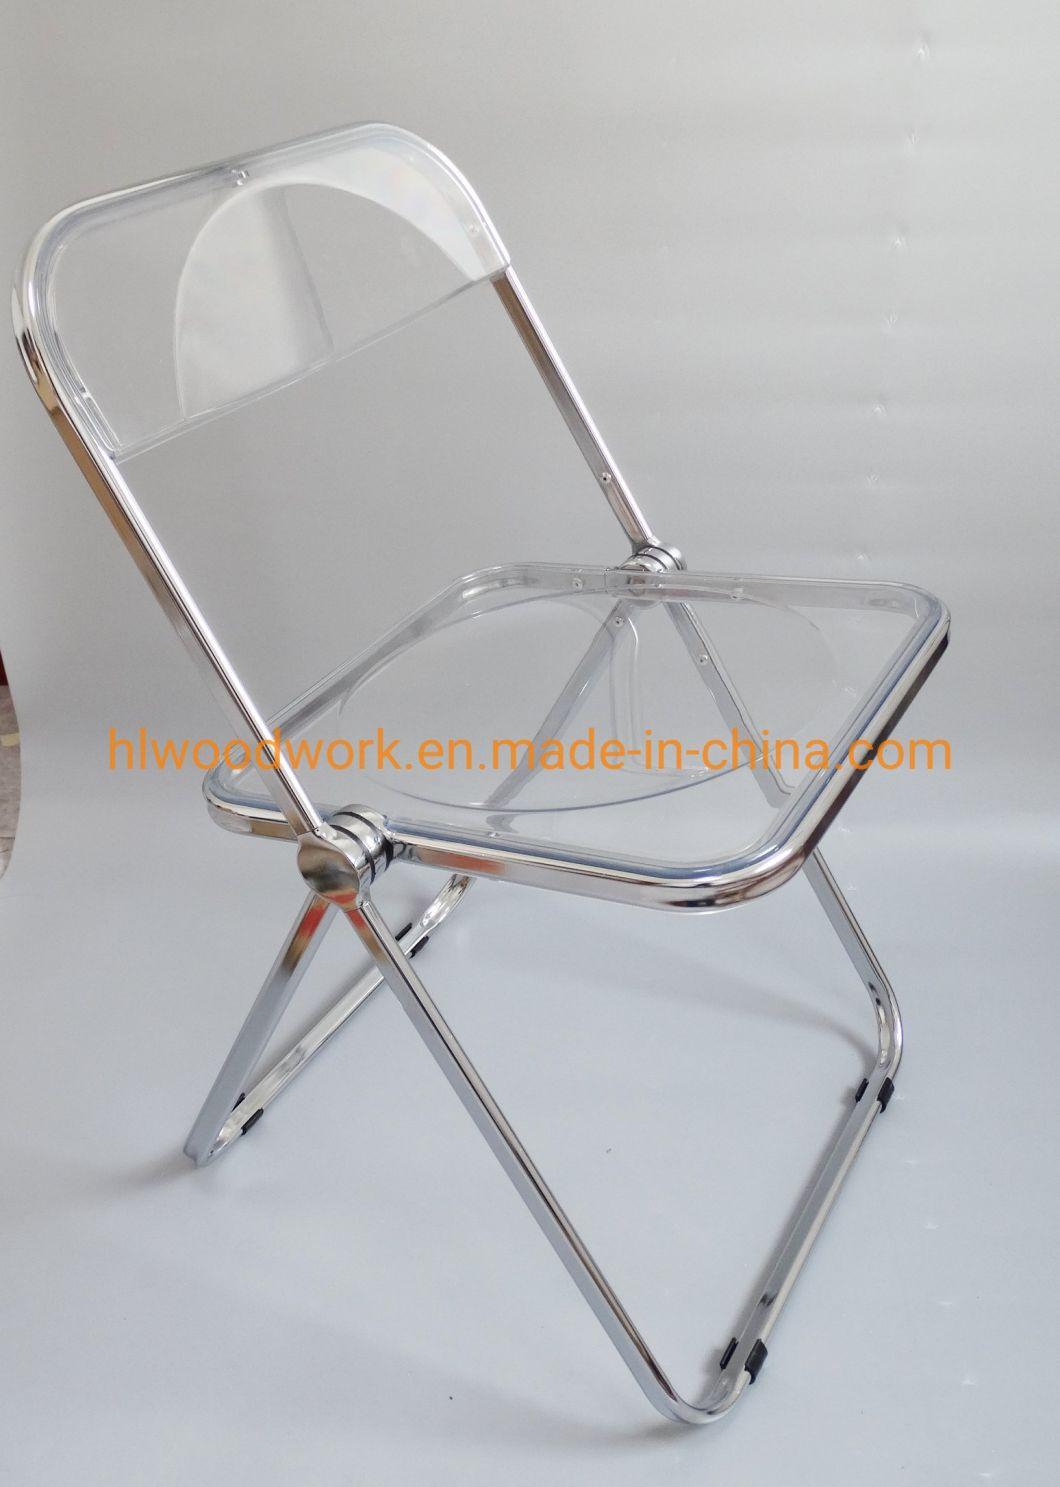 Modern Transparent Pink Folding Chair PC Plastic Resteraunt Chair Chrome Frame Office Bar Dining Leisure Banquet Wedding Meeting Chair Plastic Dining Chair